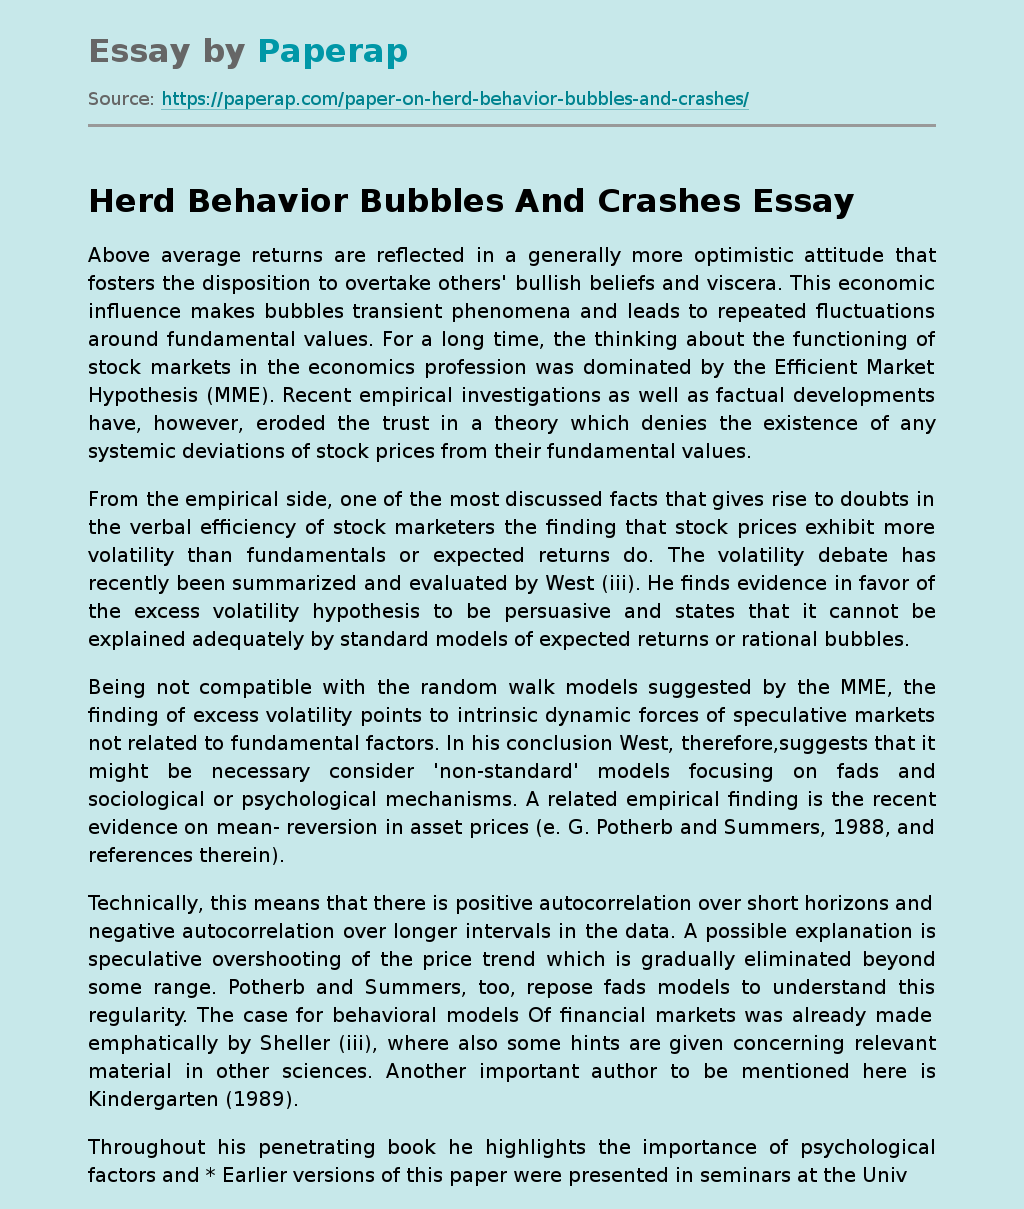 Herd Behavior Bubbles And Crashes